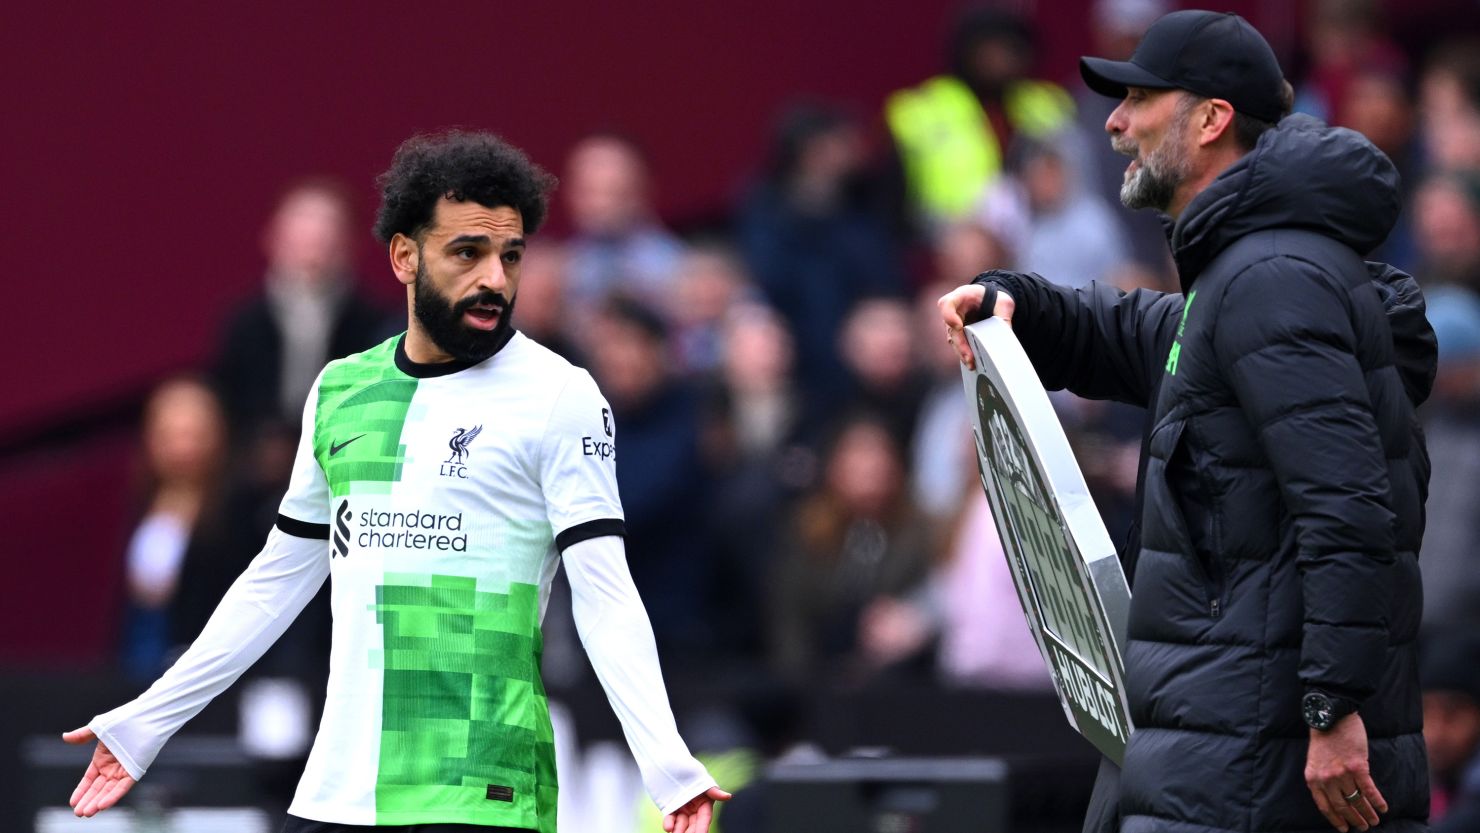 Mohamed Salah (left) appeared to argue with manager Jurgen Klopp during the match against West Ham.